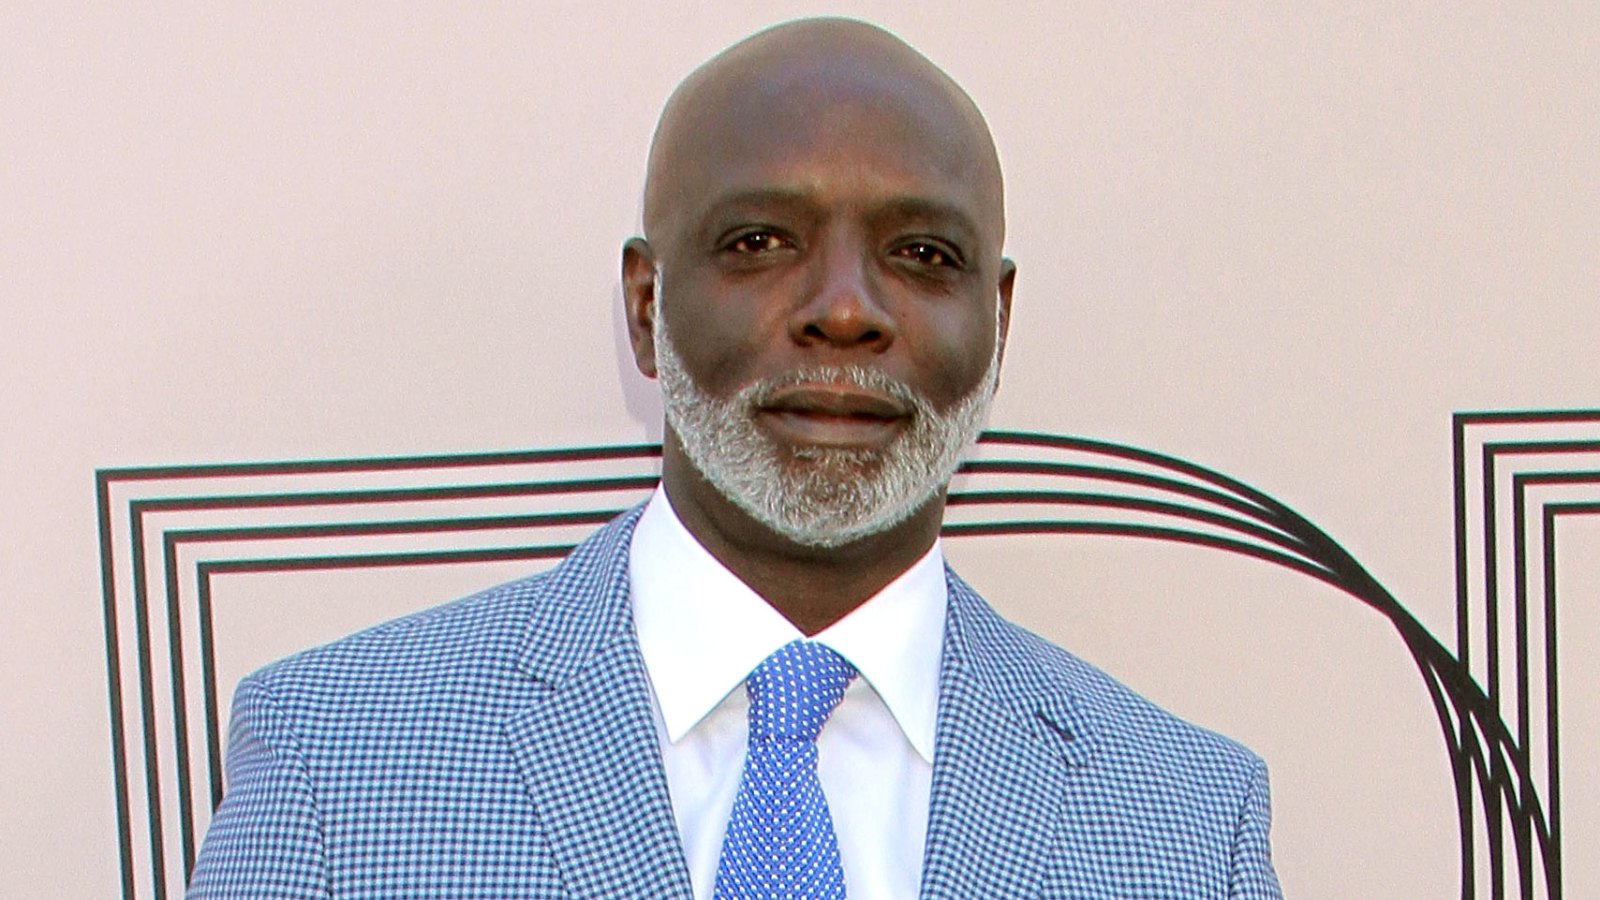 RHOA's Peter Thomas Temporarily Closes Sports Bar Because of $237K in Unpaid Taxes